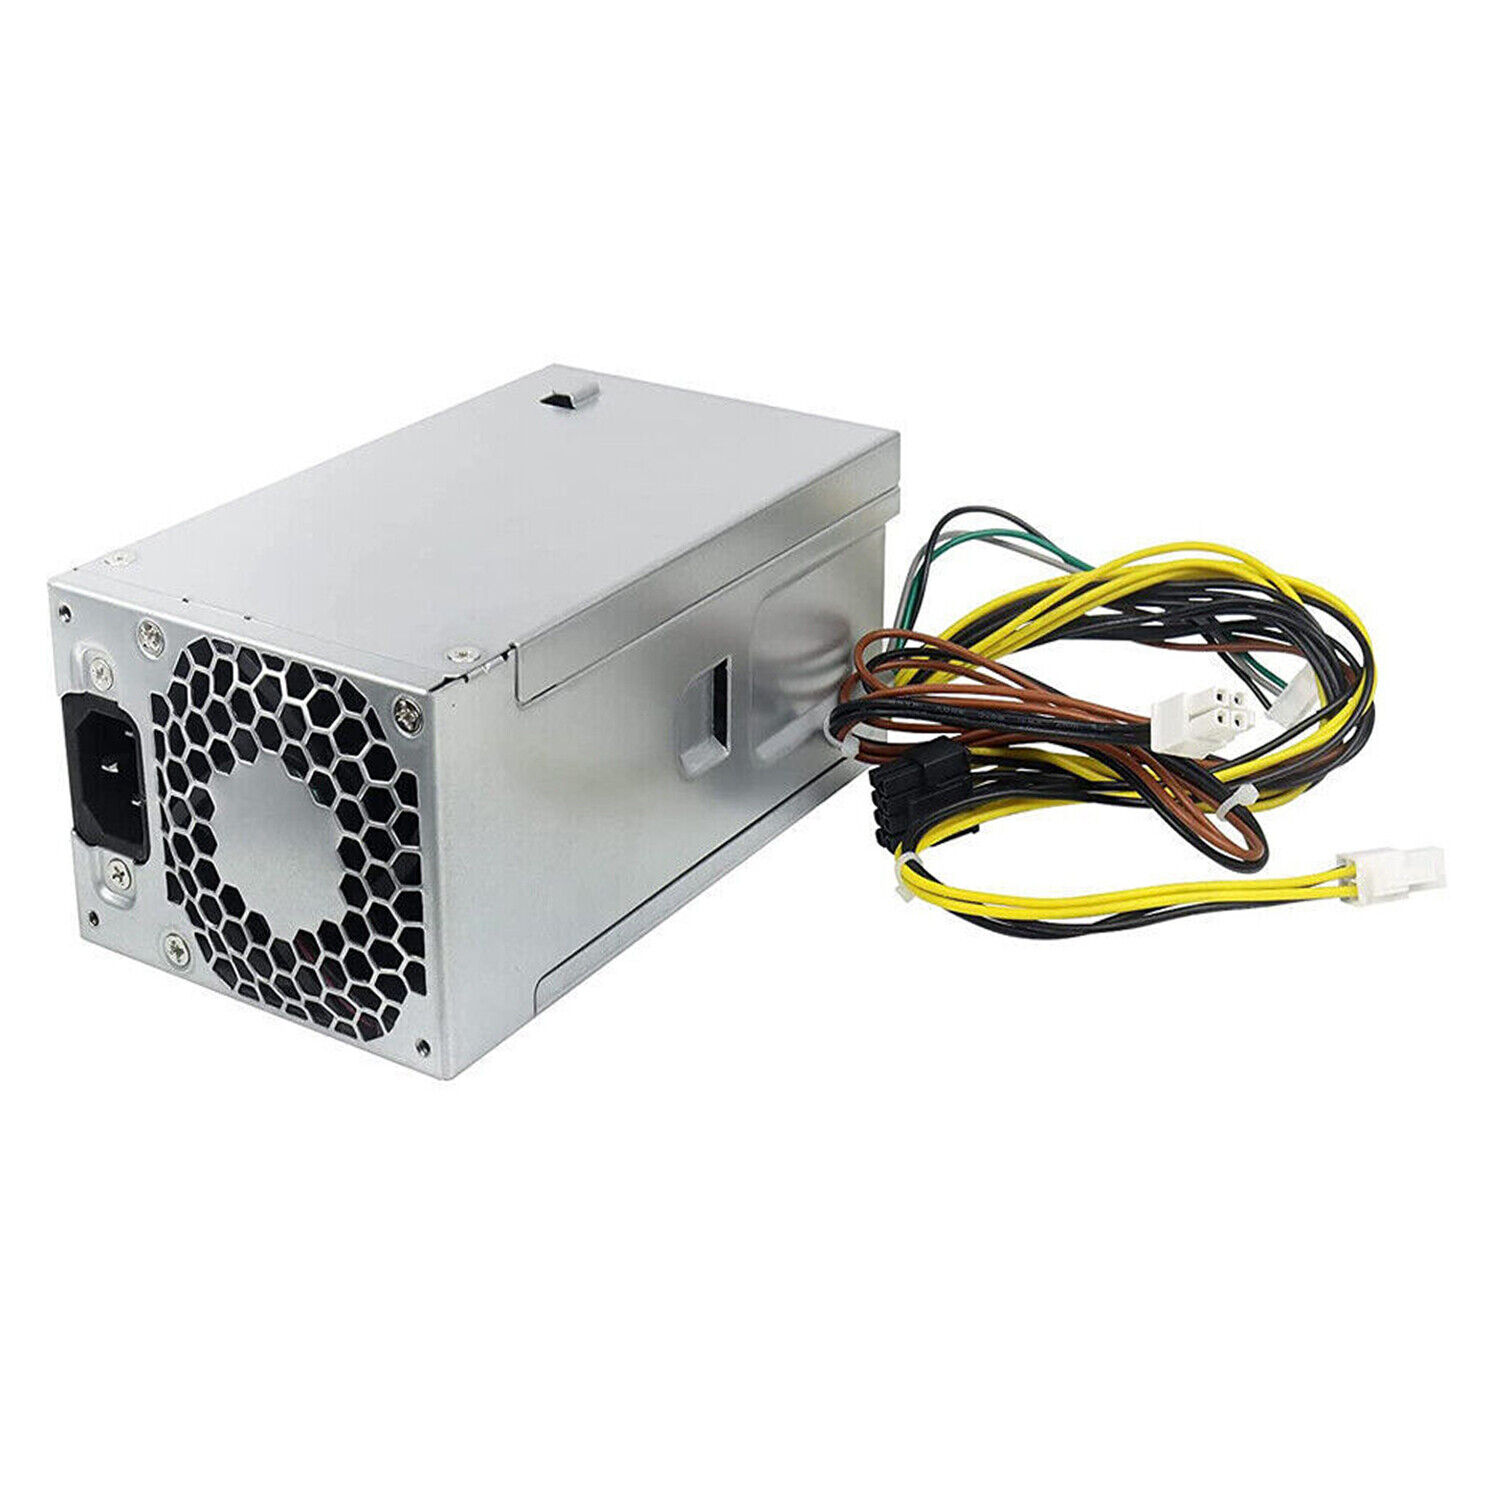 New 400W Power Supply 942332-001 PSU For HP 280 288 285 480 600 680 800 G3 G4 US